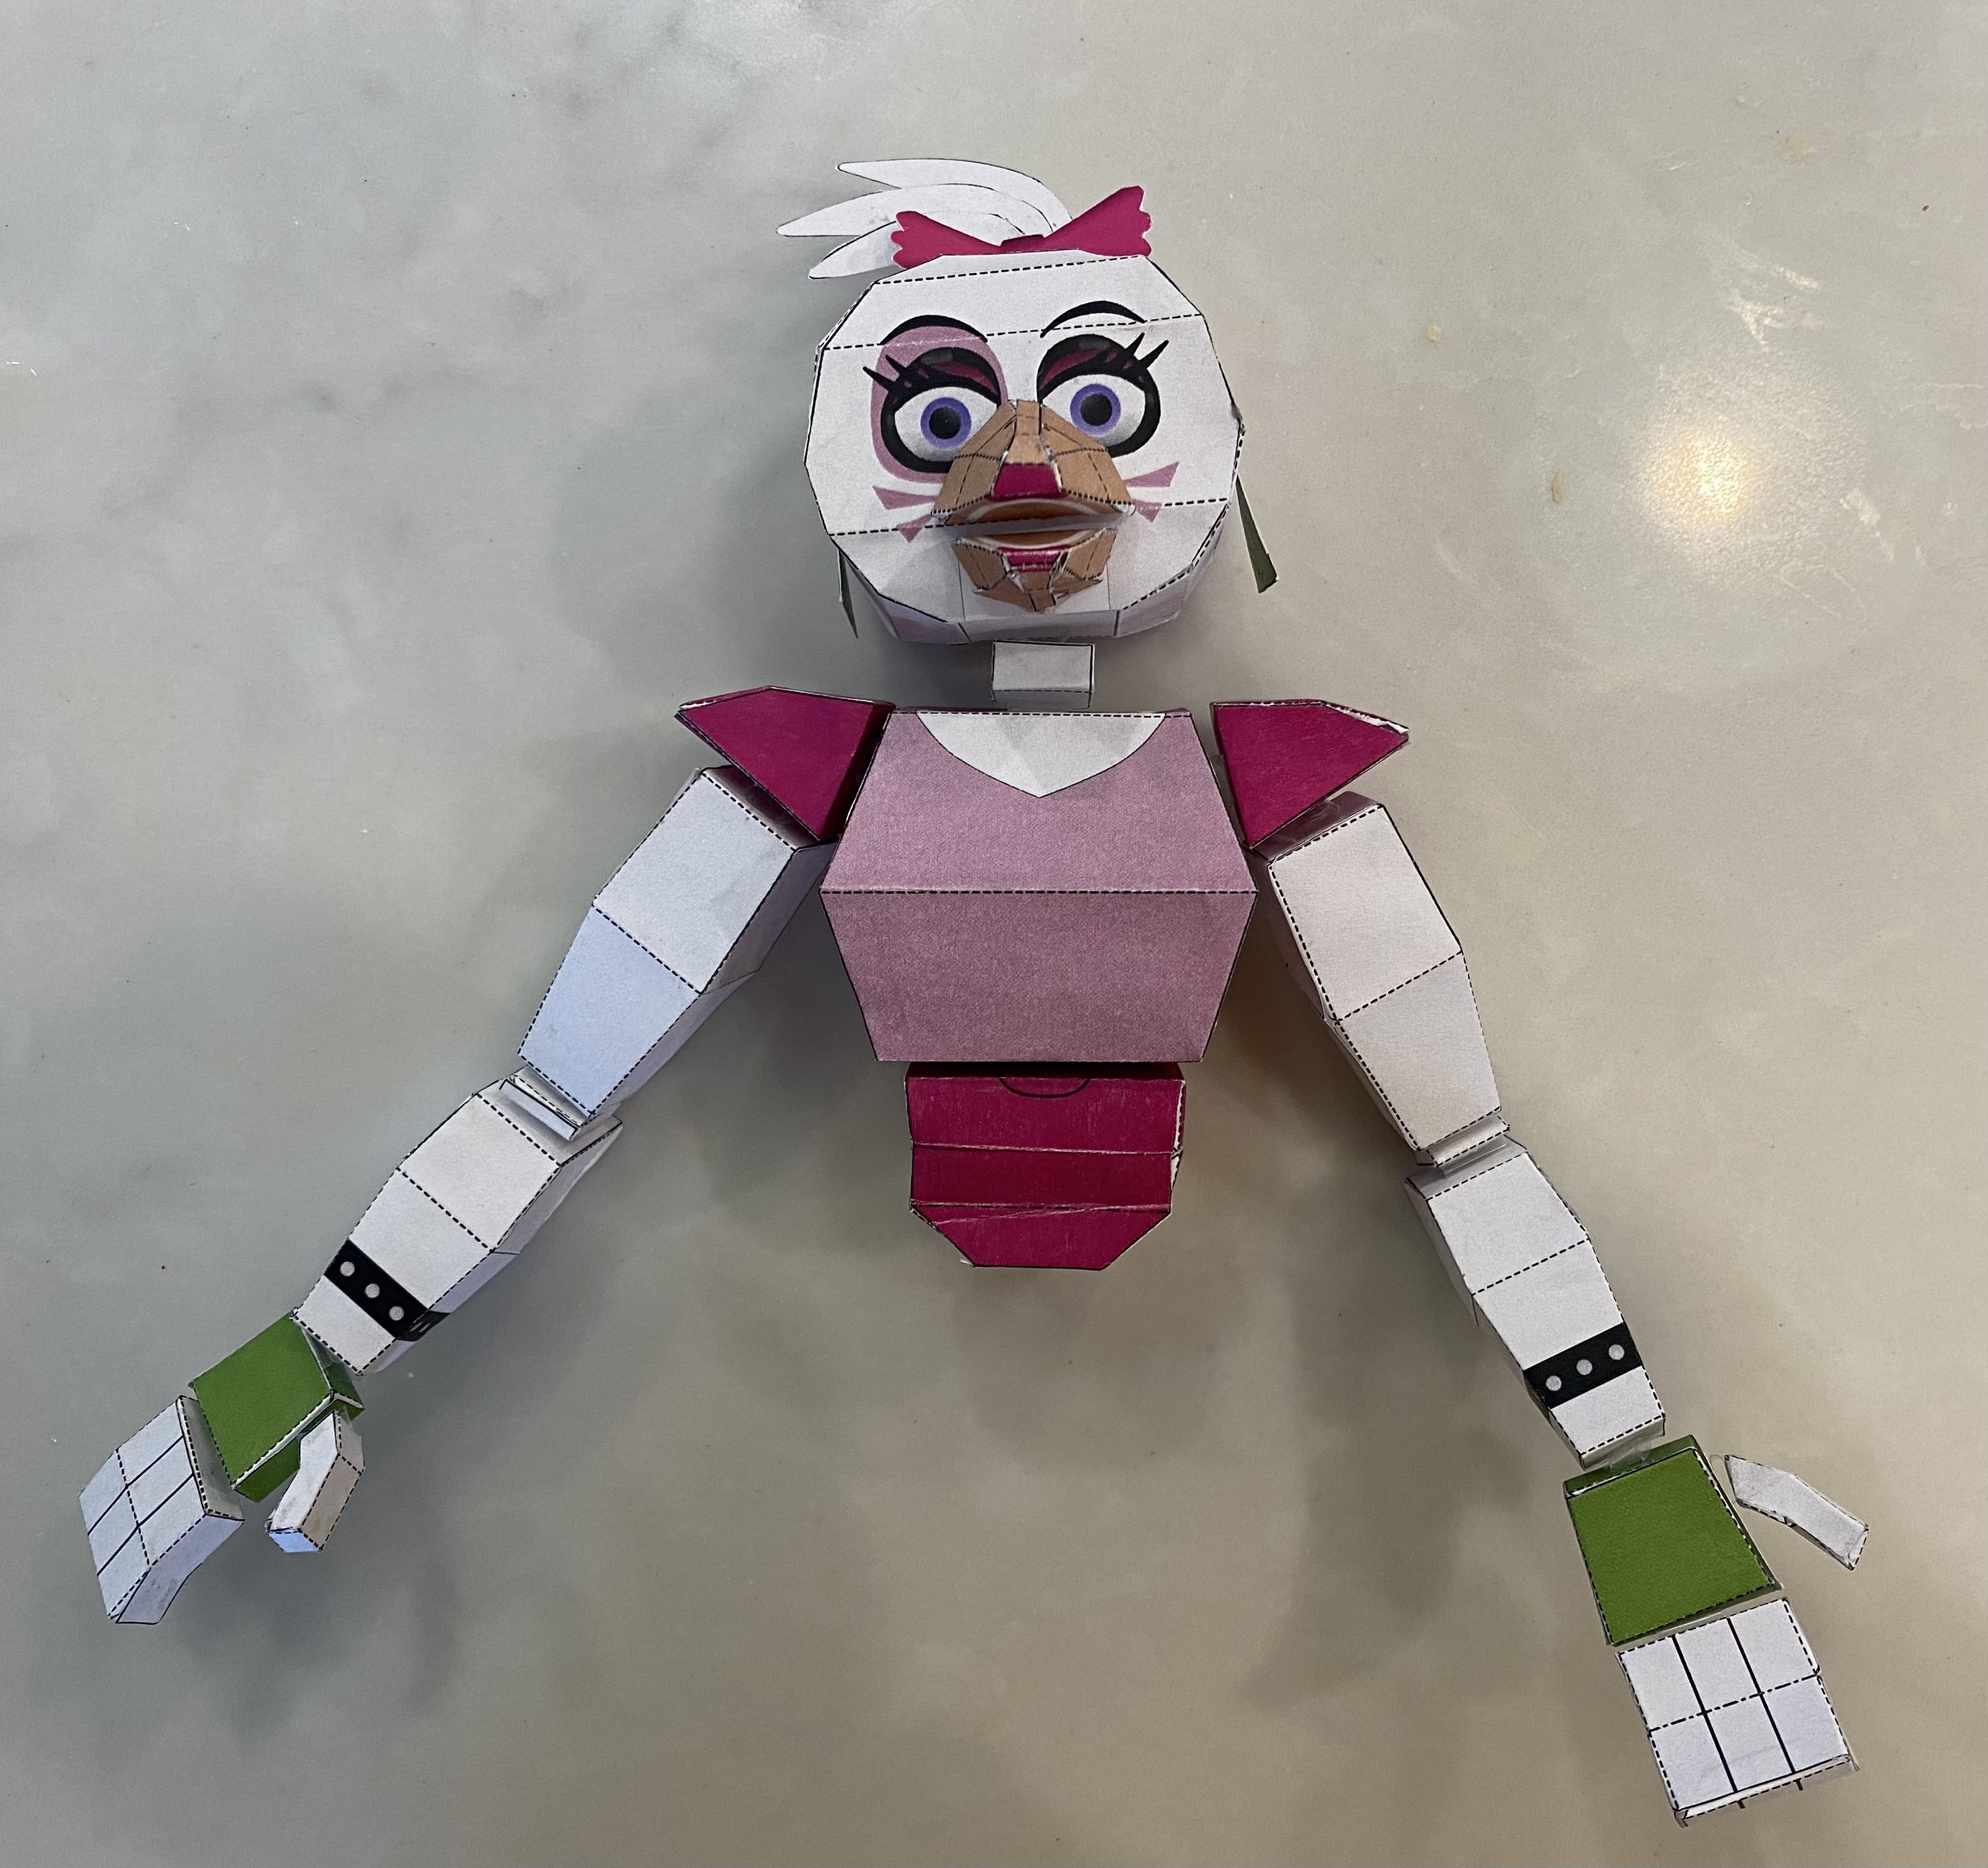 Reply for updates on glam Chica papercraft